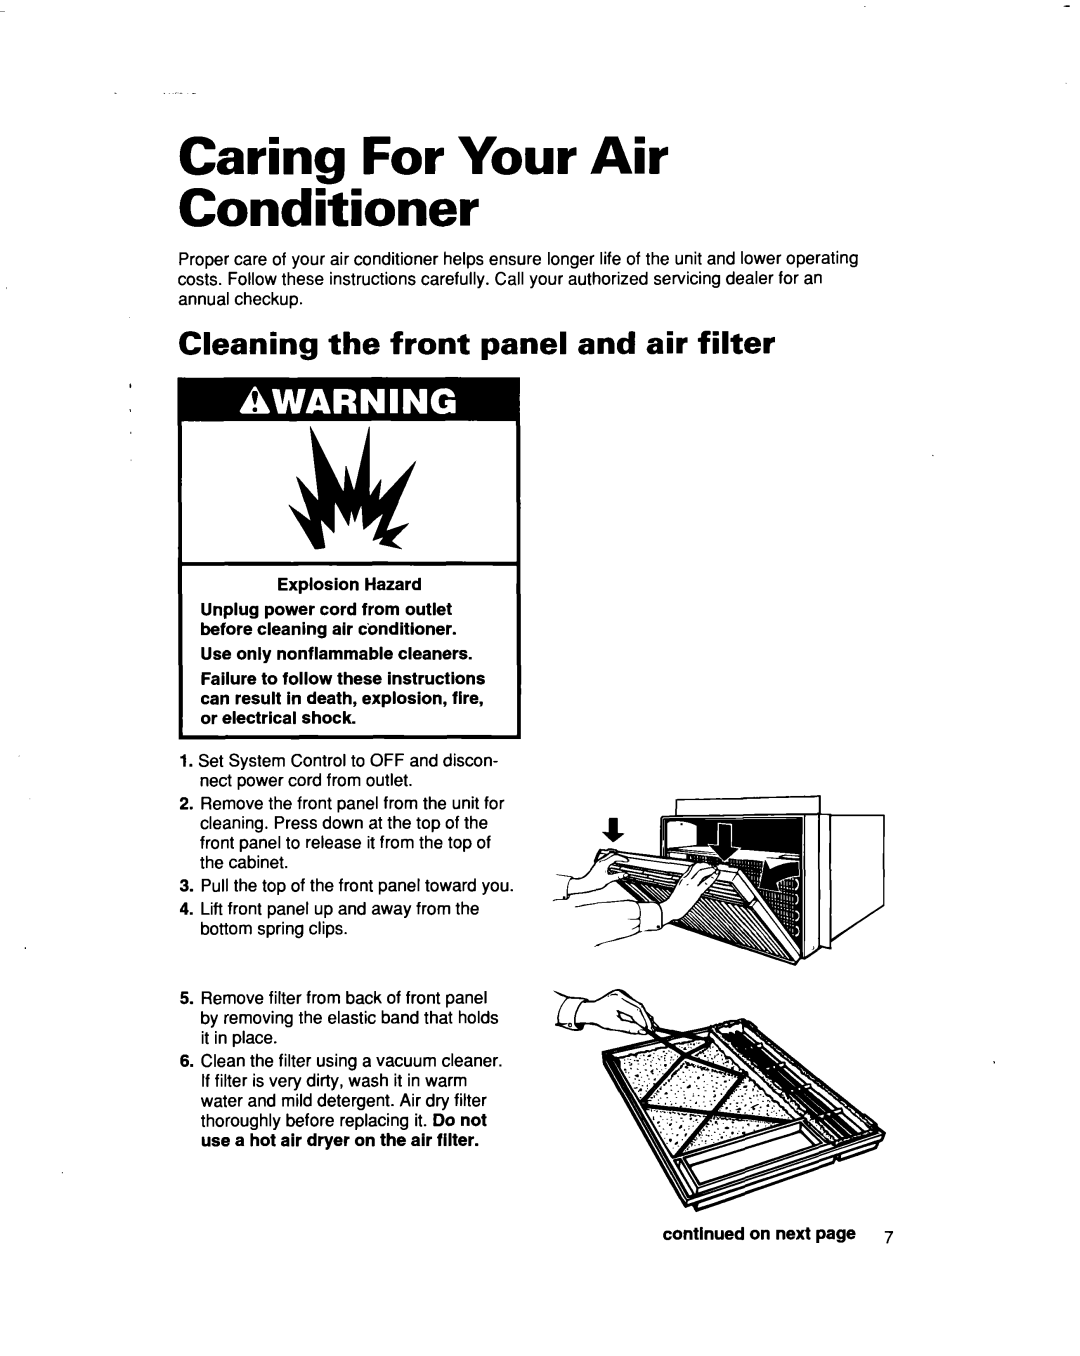 Whirlpool X05002X0, X07002X0 Caring For Your Air Conditioner, Cleaning the front panel and air filter, Explosion Hazard 